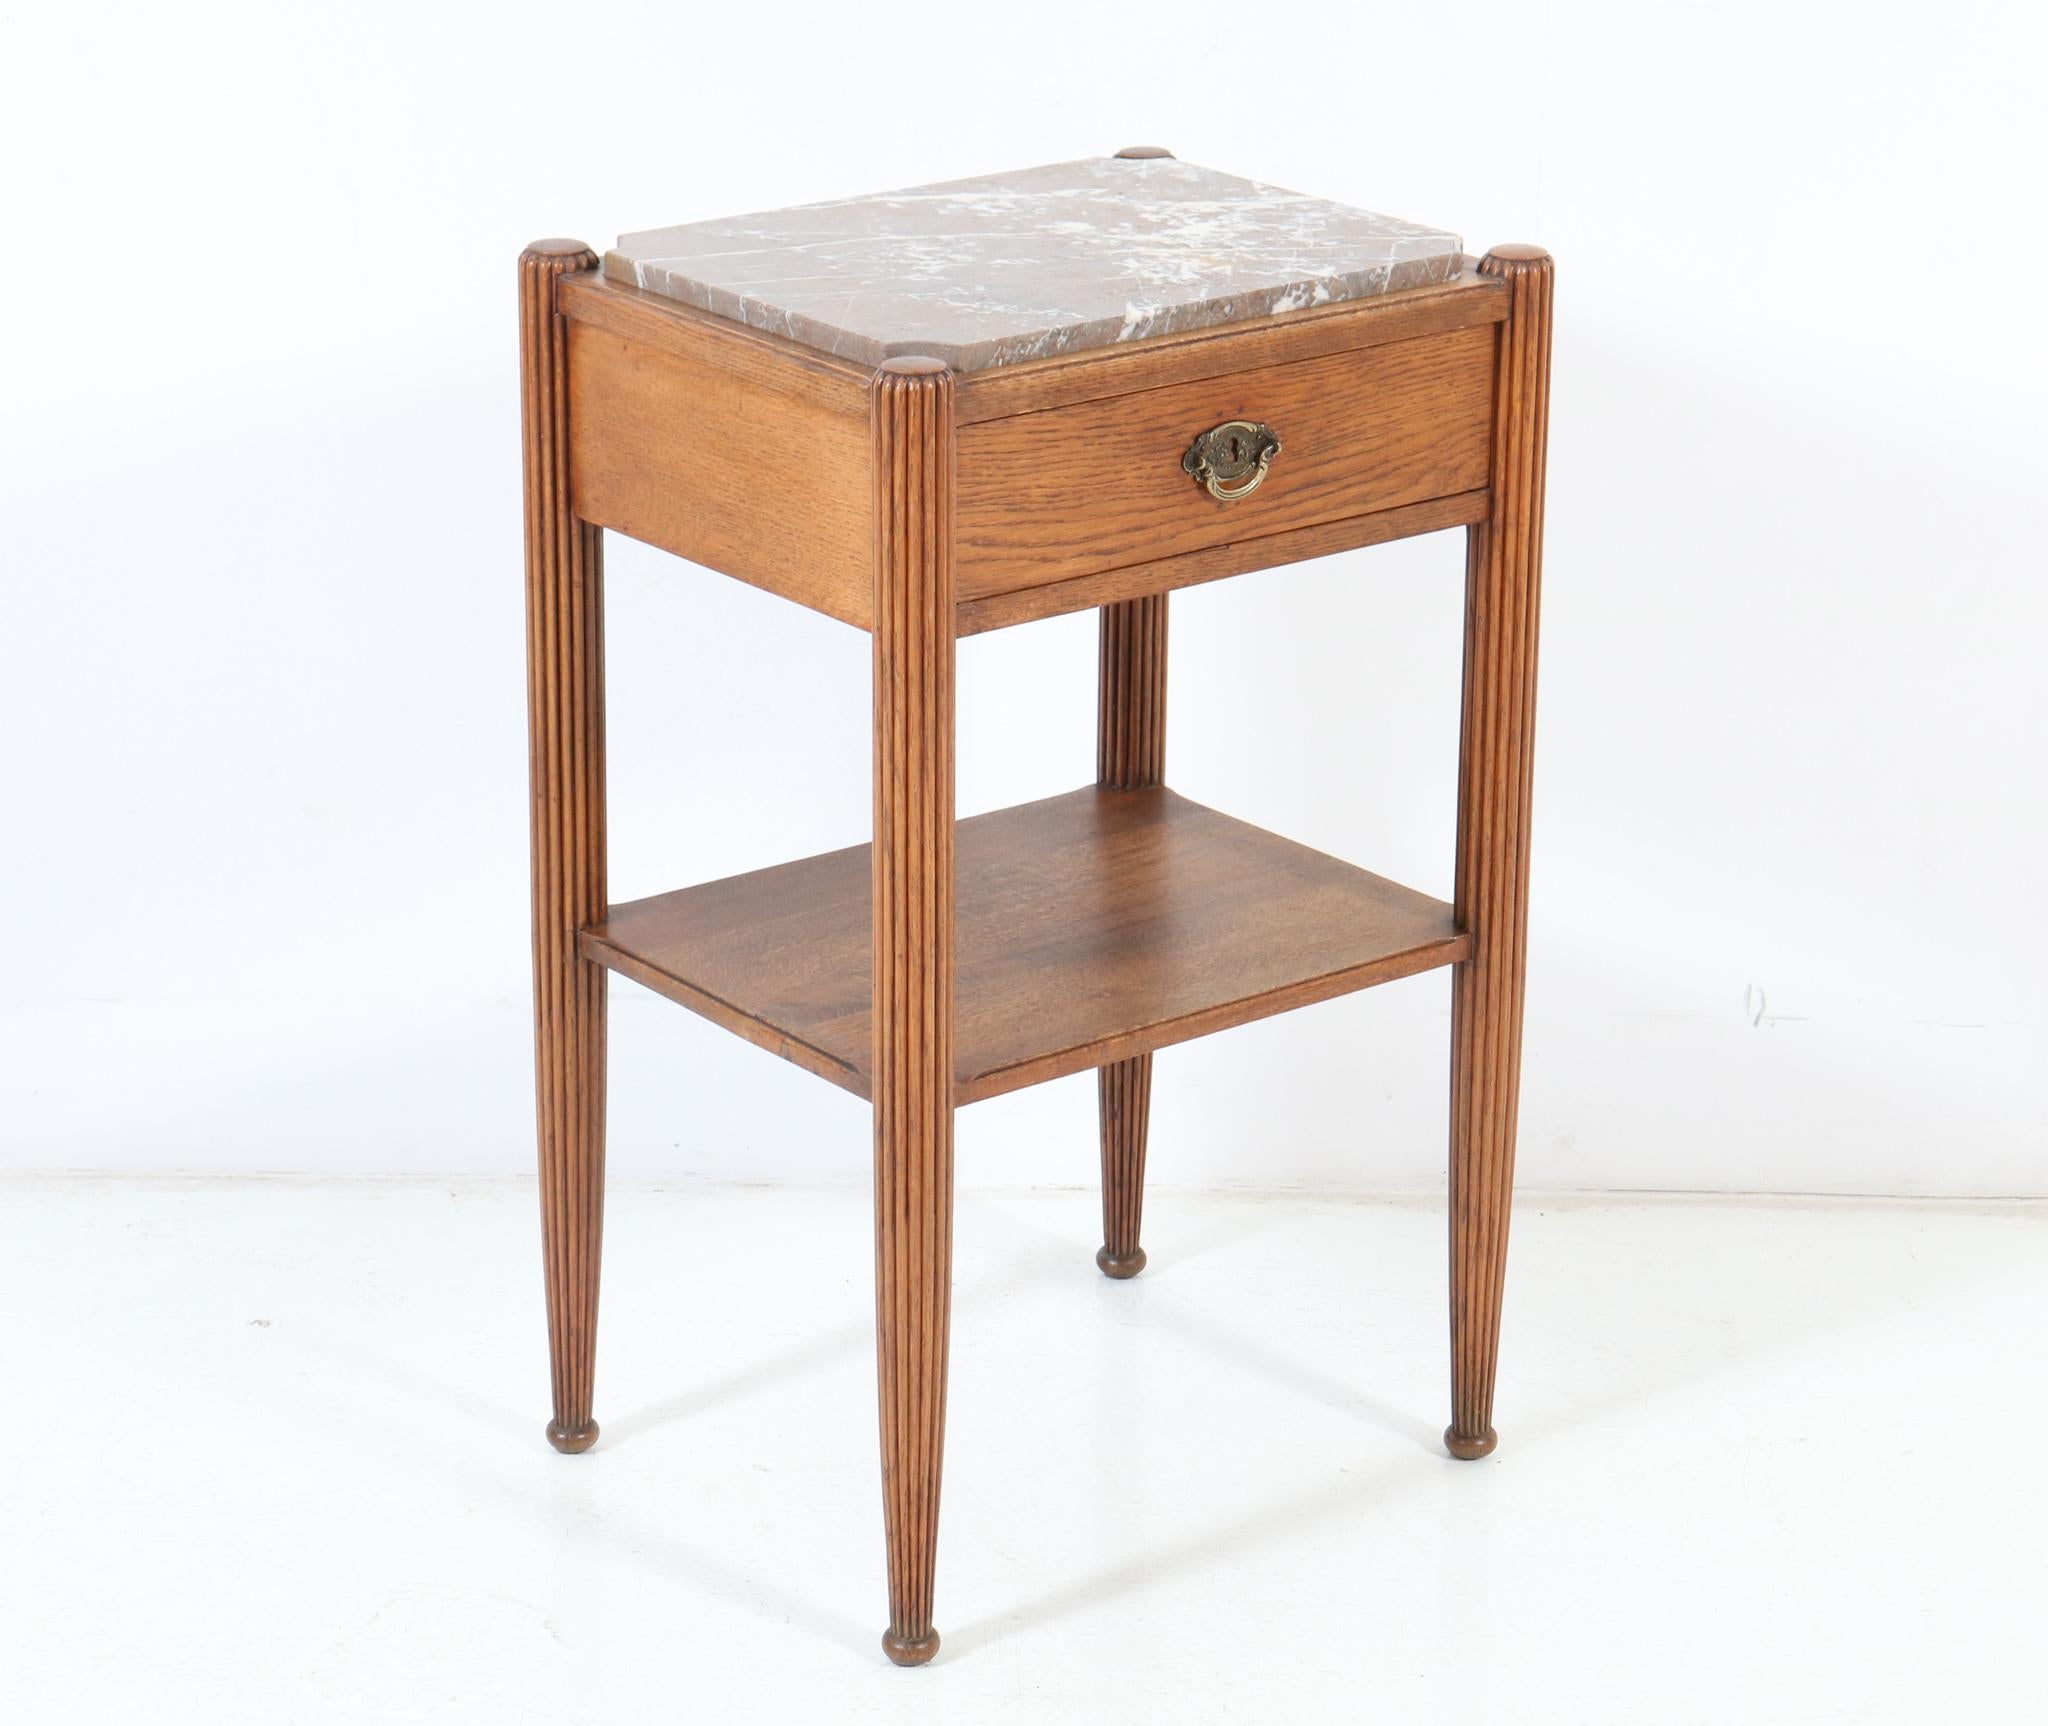 Mid-20th Century Oak Art Deco Side Table with Marble Top, 1930s For Sale